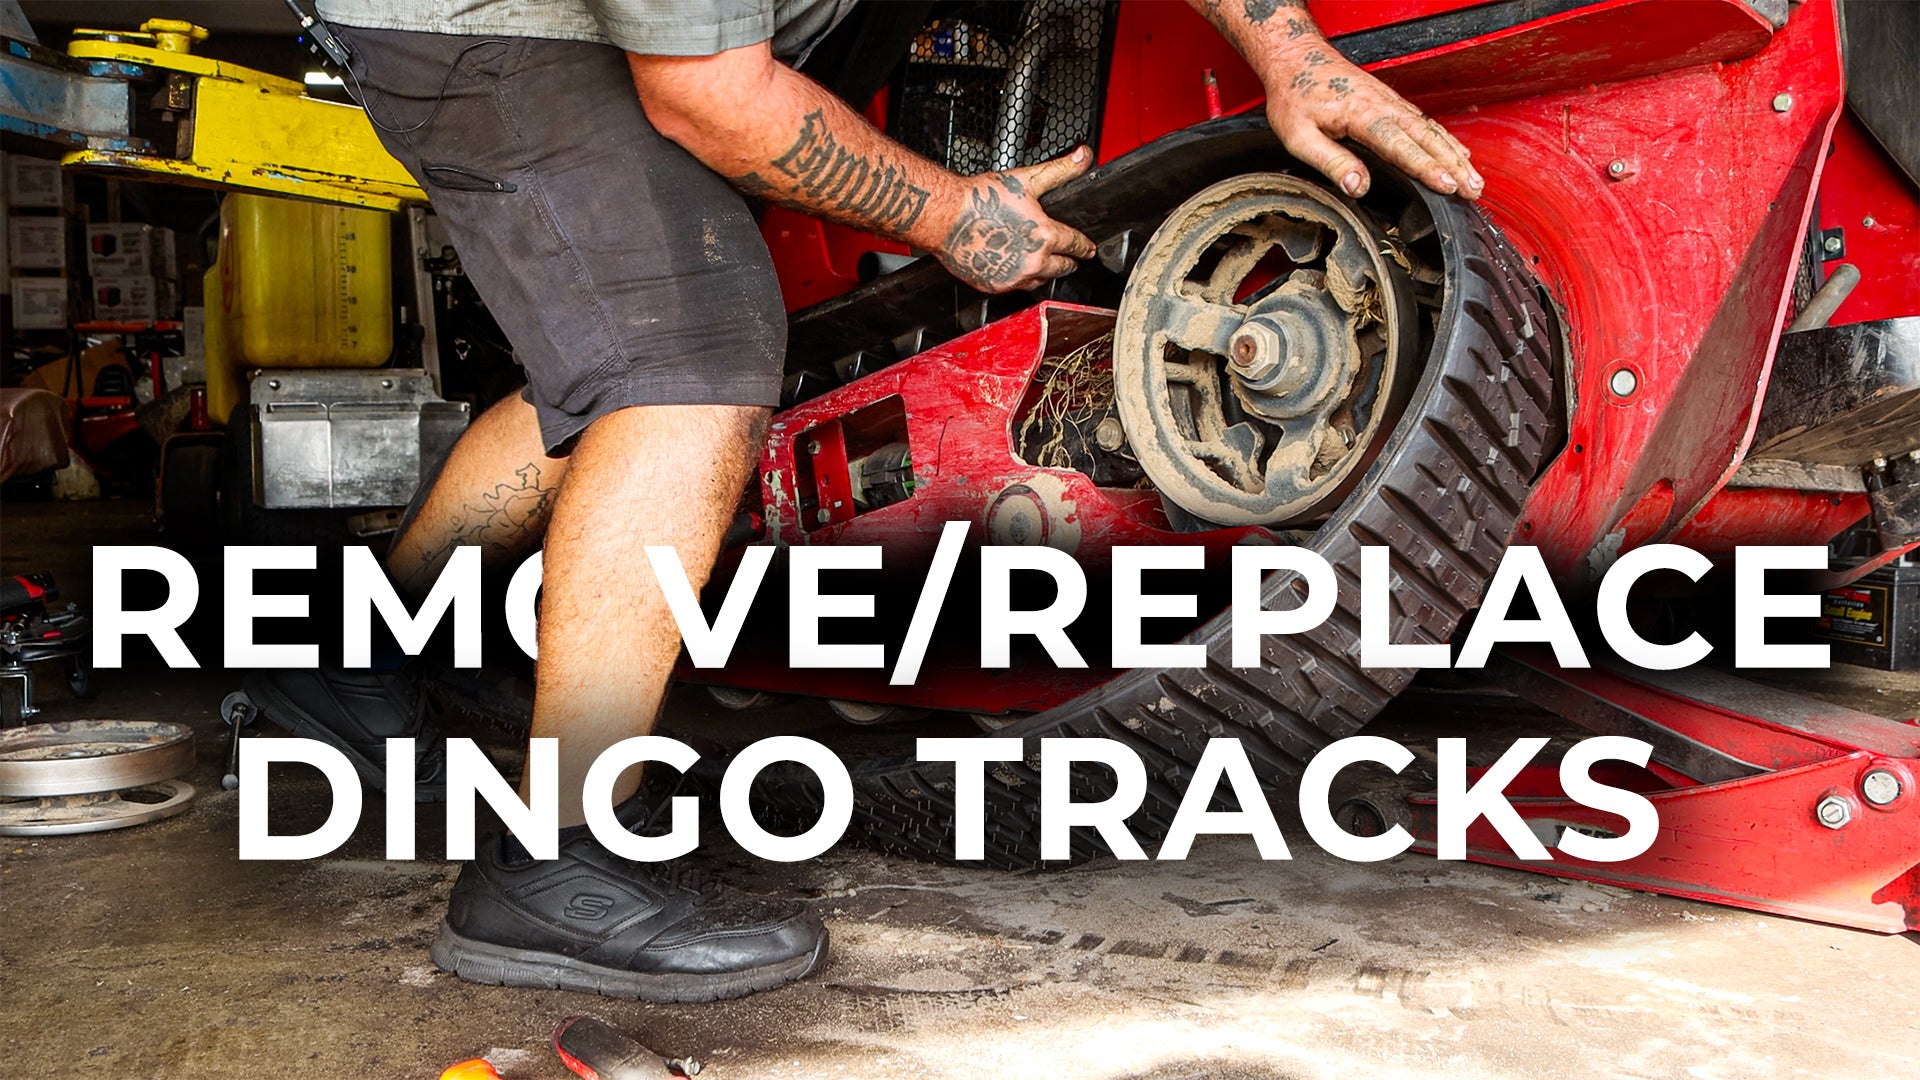 How to Remove and Replace Tracks On TORO Dingo